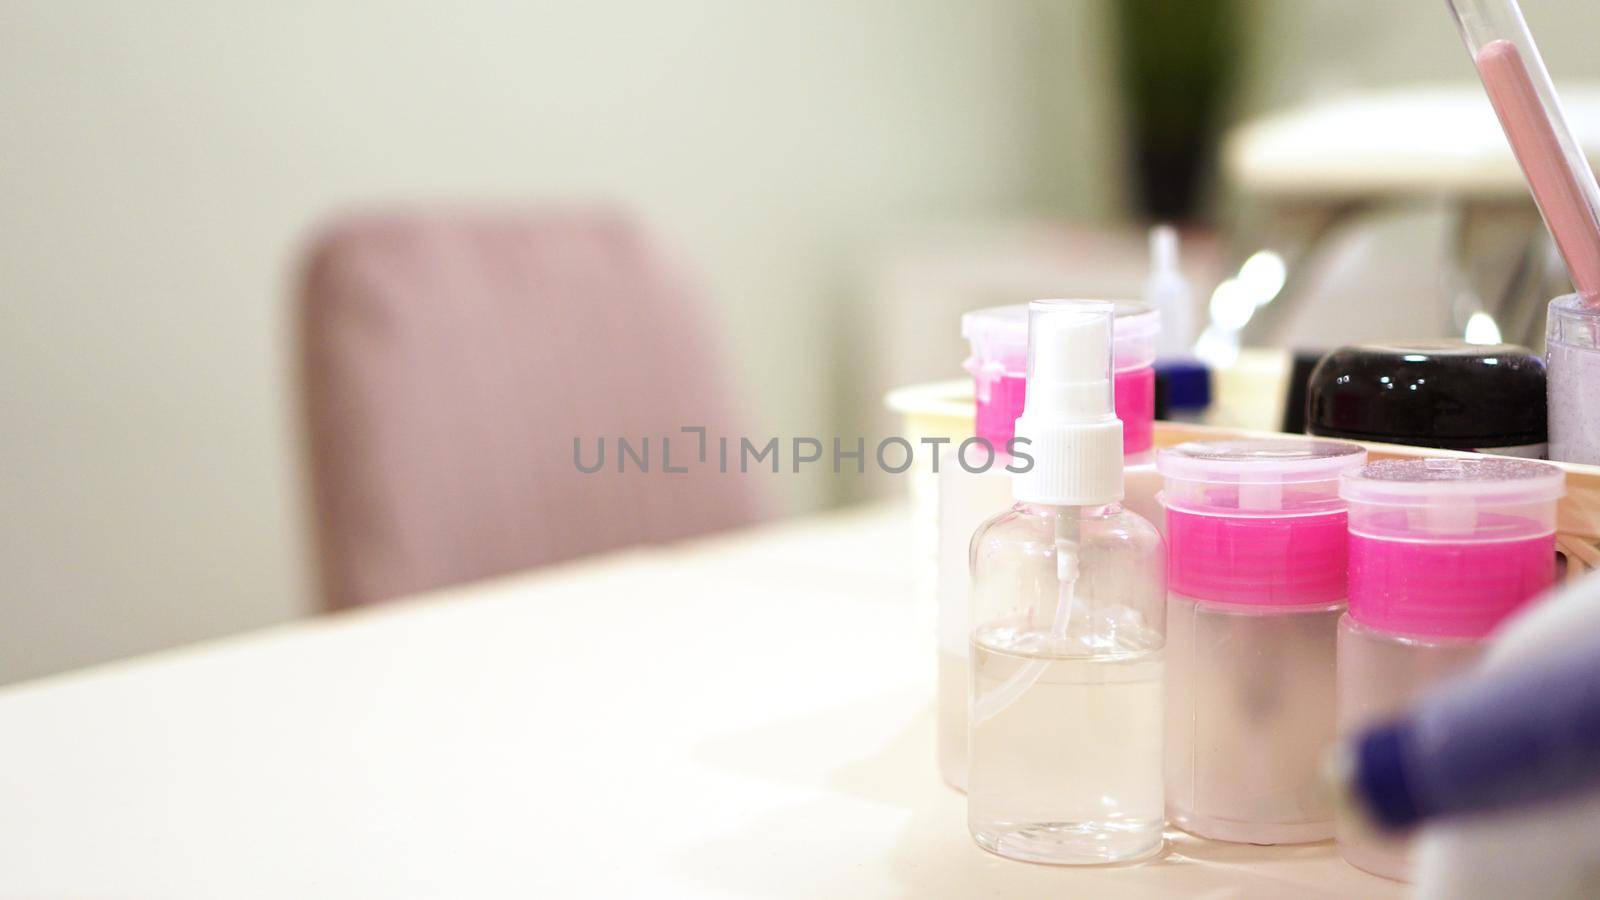 Equipment - plastic jars with solutions and water in nail salon by natali_brill